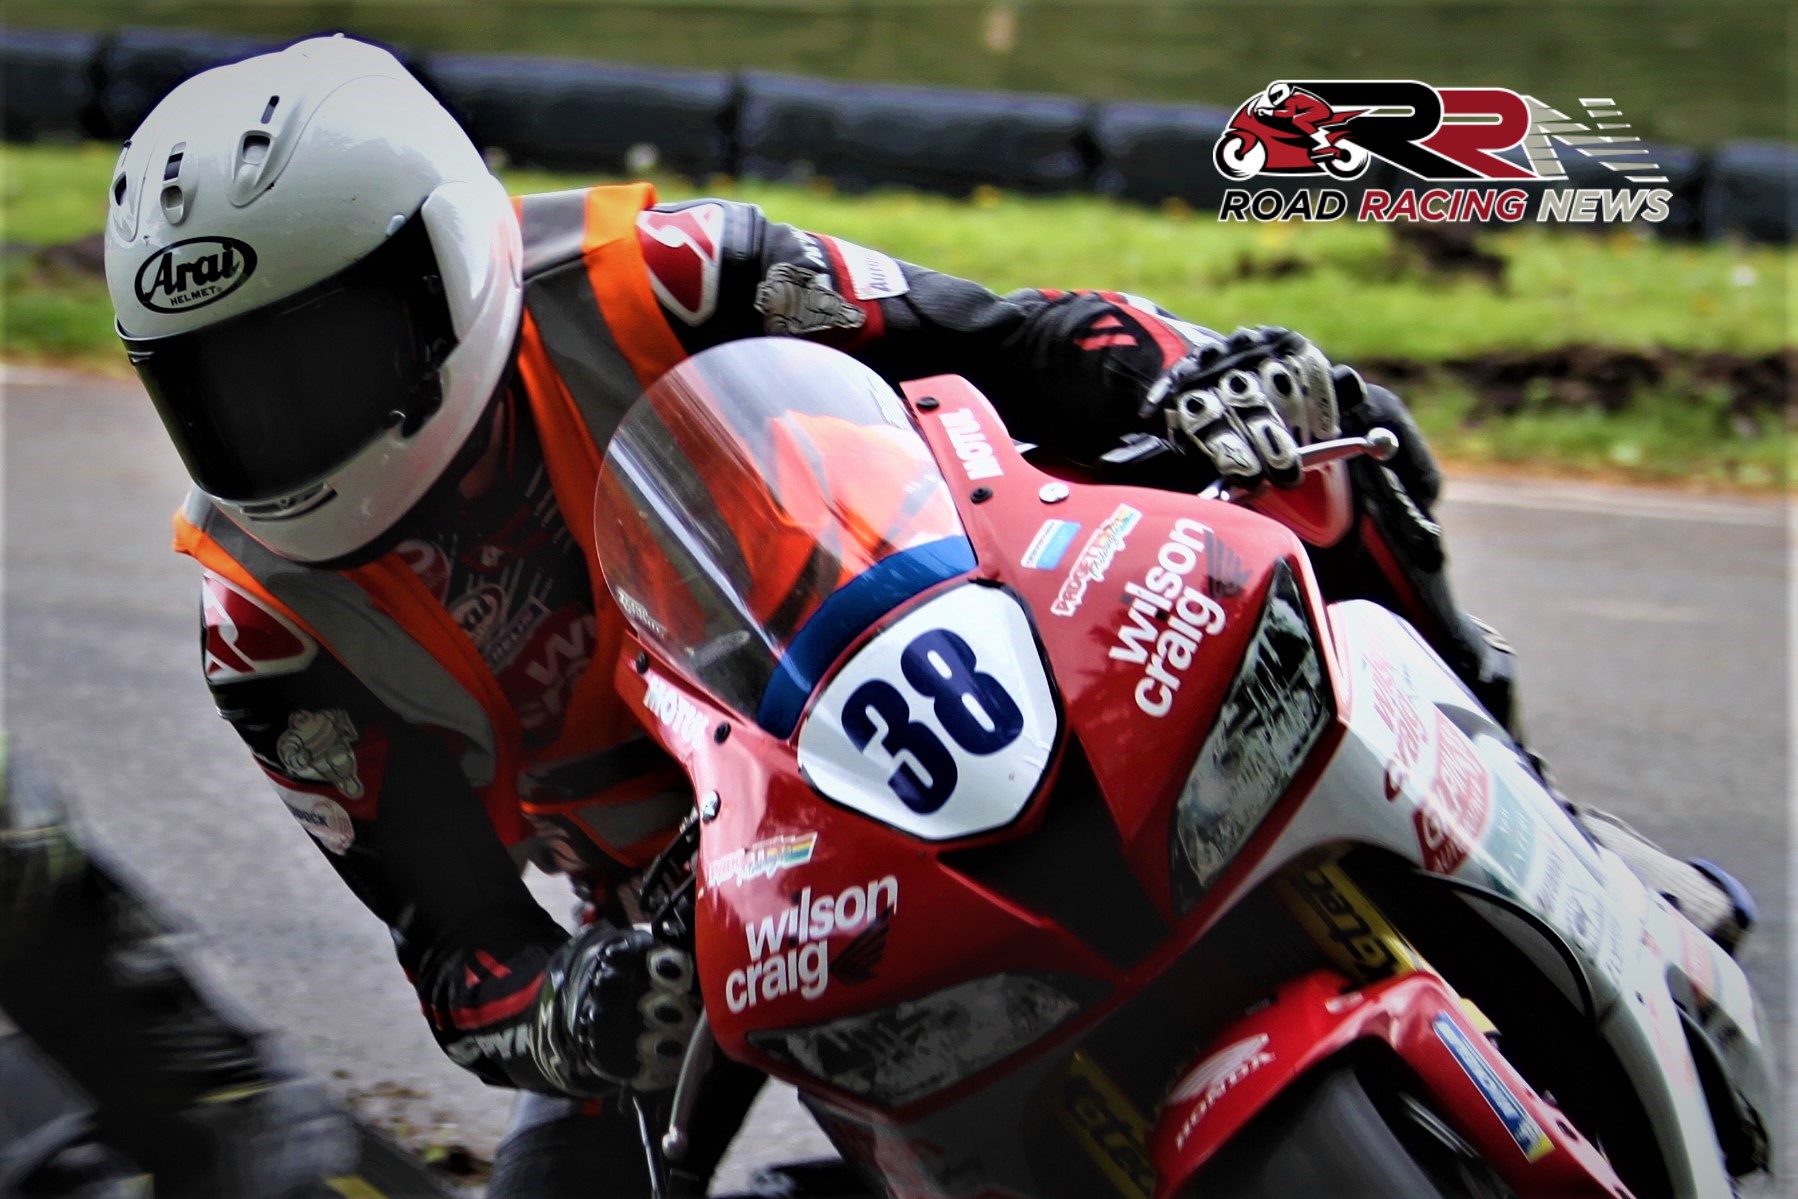 Burns Re-Joins Wilson Craig Racing For Aberdare, Armoy Ventures